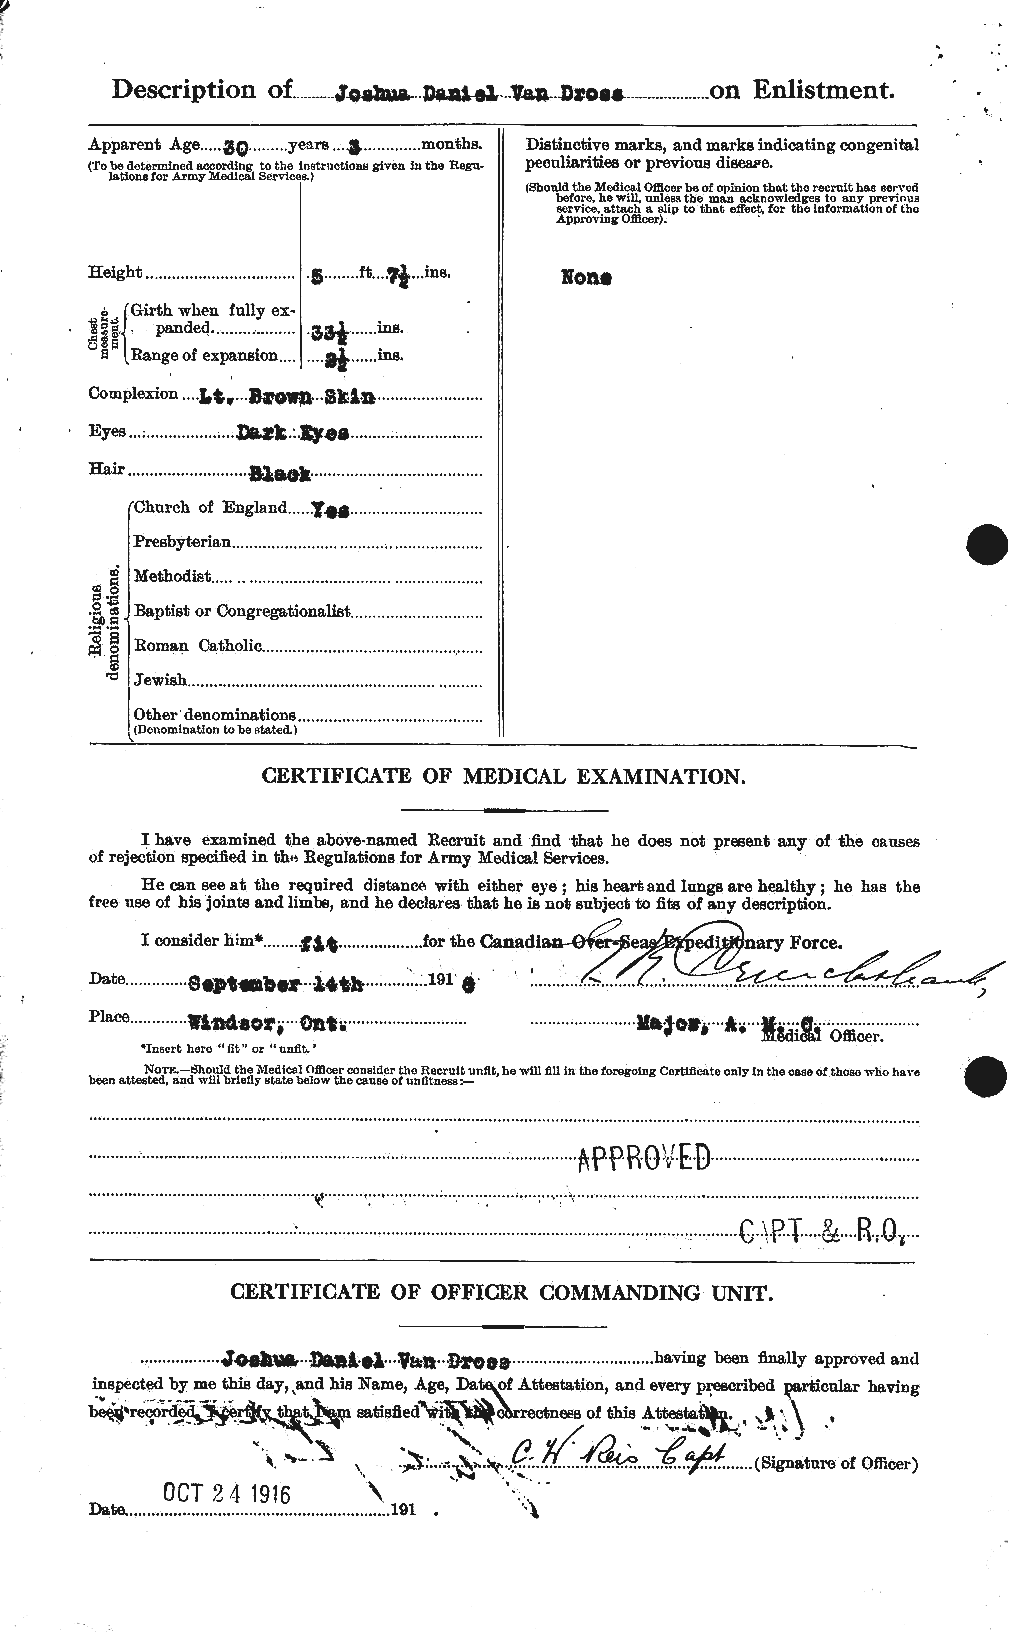 Personnel Records of the First World War - CEF 647359b